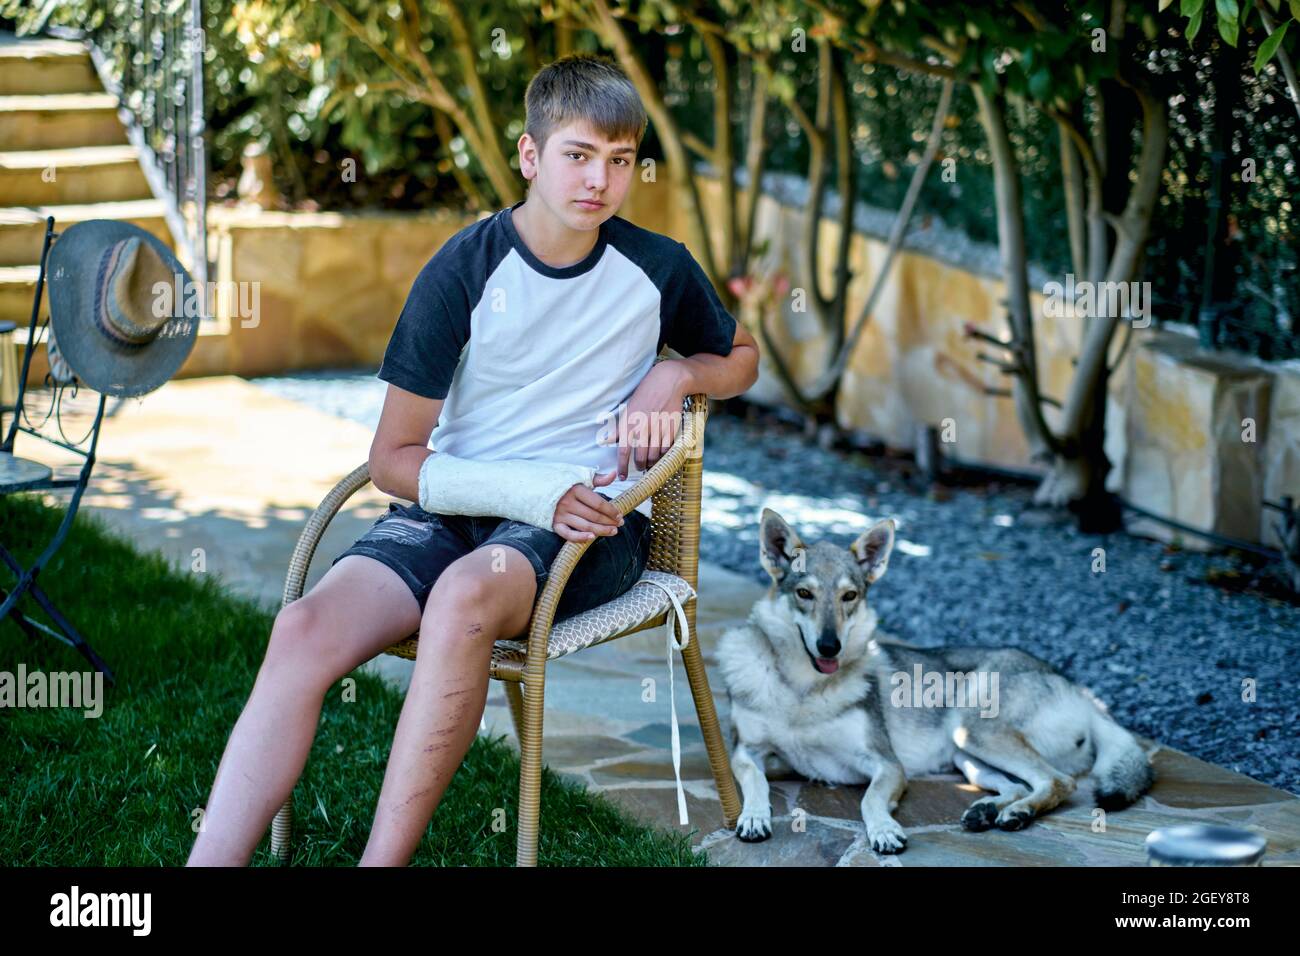 Portrait of young caucasian boy with a broken and cast arm sitting in a chair outdoor in a garden with a dog. Lifestyle concept. Stock Photo